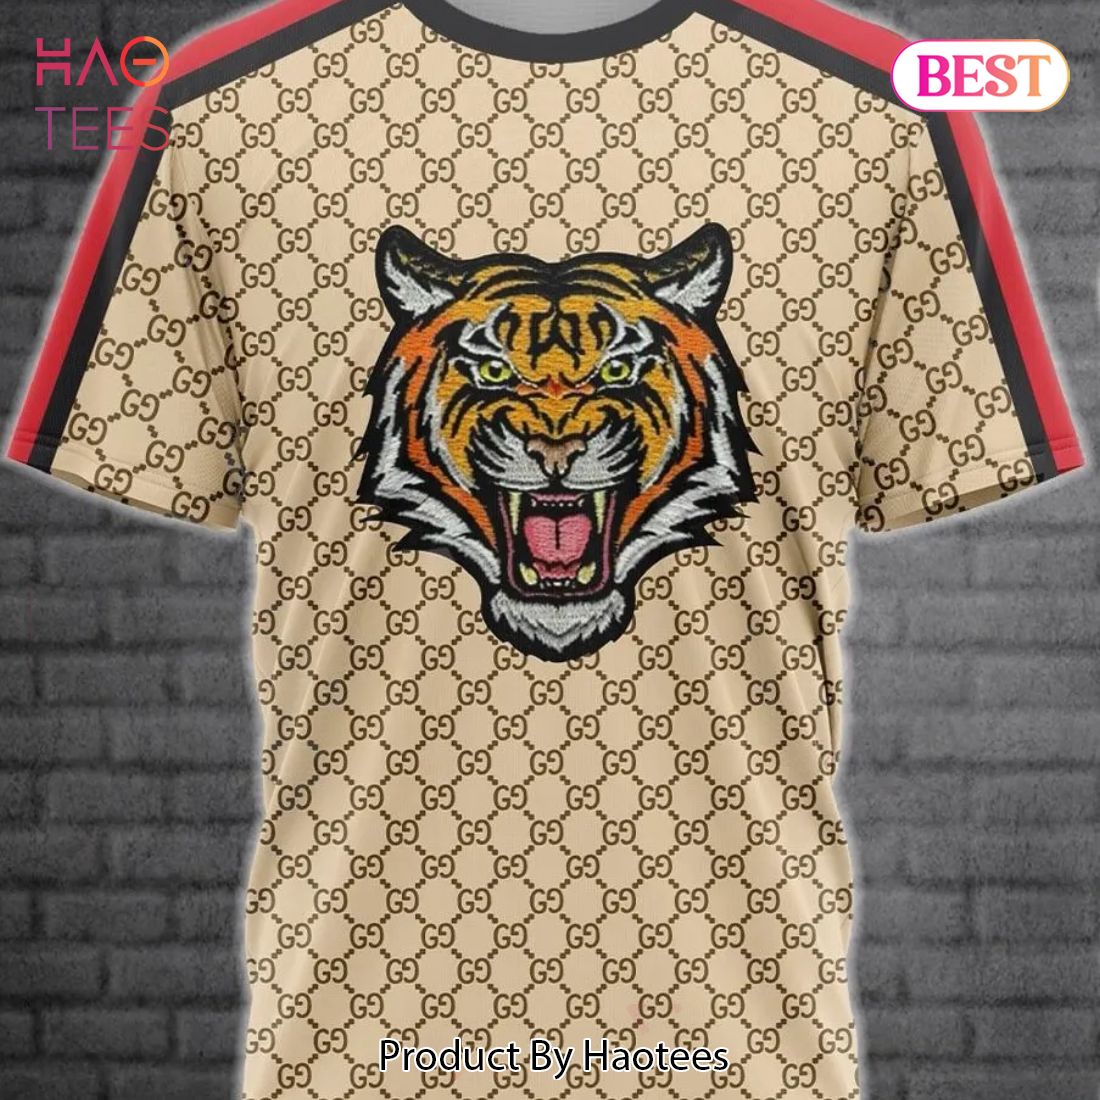 [NEW FASHION] Gucci Tiger Beige Luxury Brand T-Shirt Outfit For Men Women